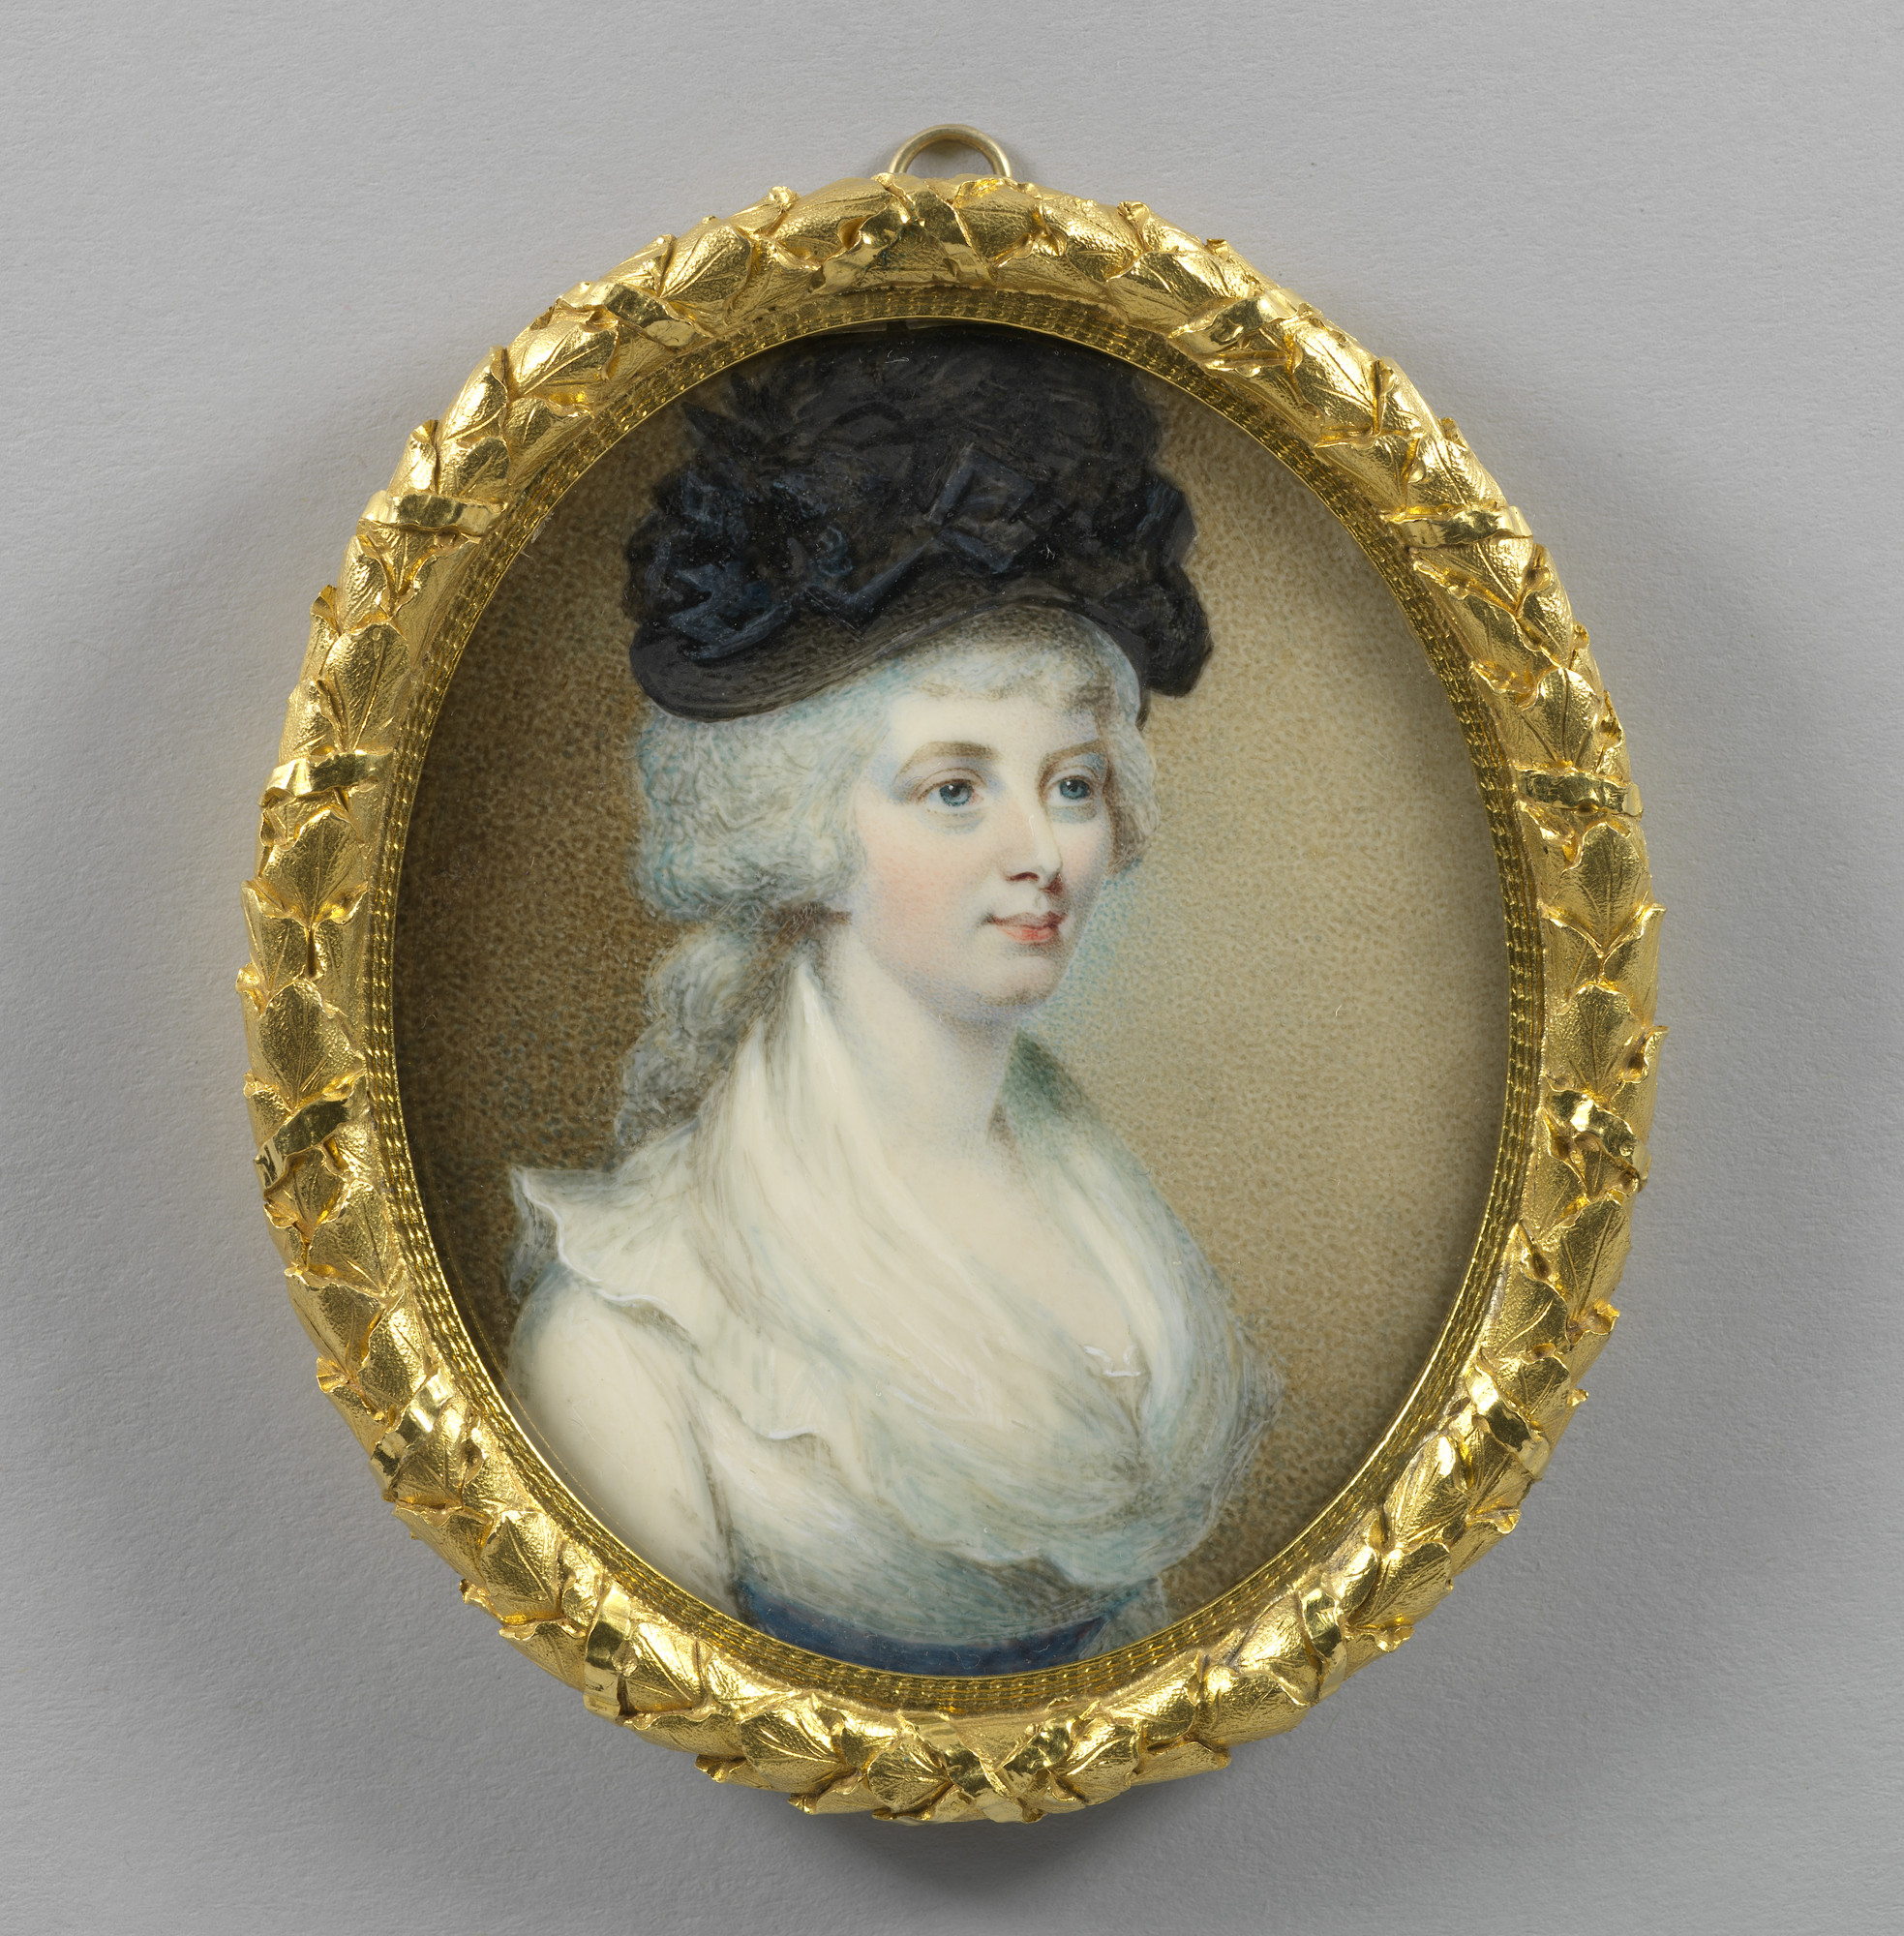 Princess Charlotte, later Queen of Württemberg, after Edward Miles. Courtesy of the Royal Collection